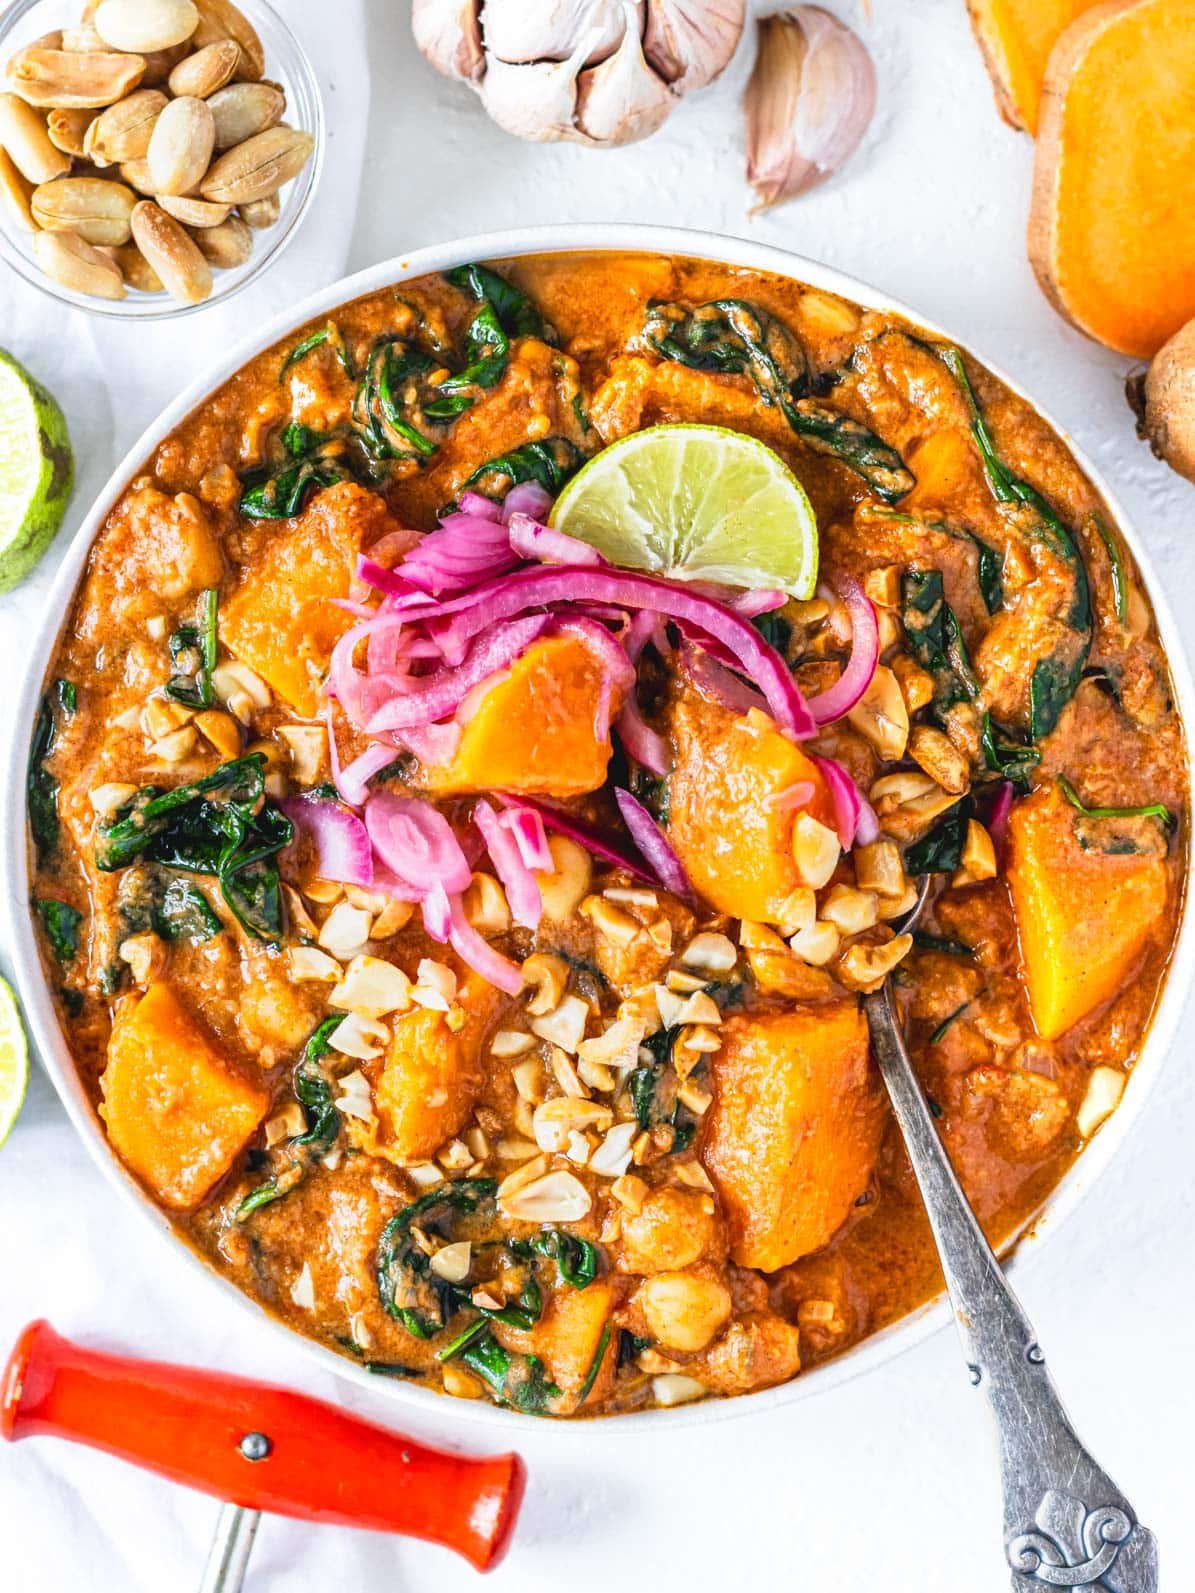 African peanut stew in a bowl with silver spoon and a lime wedge